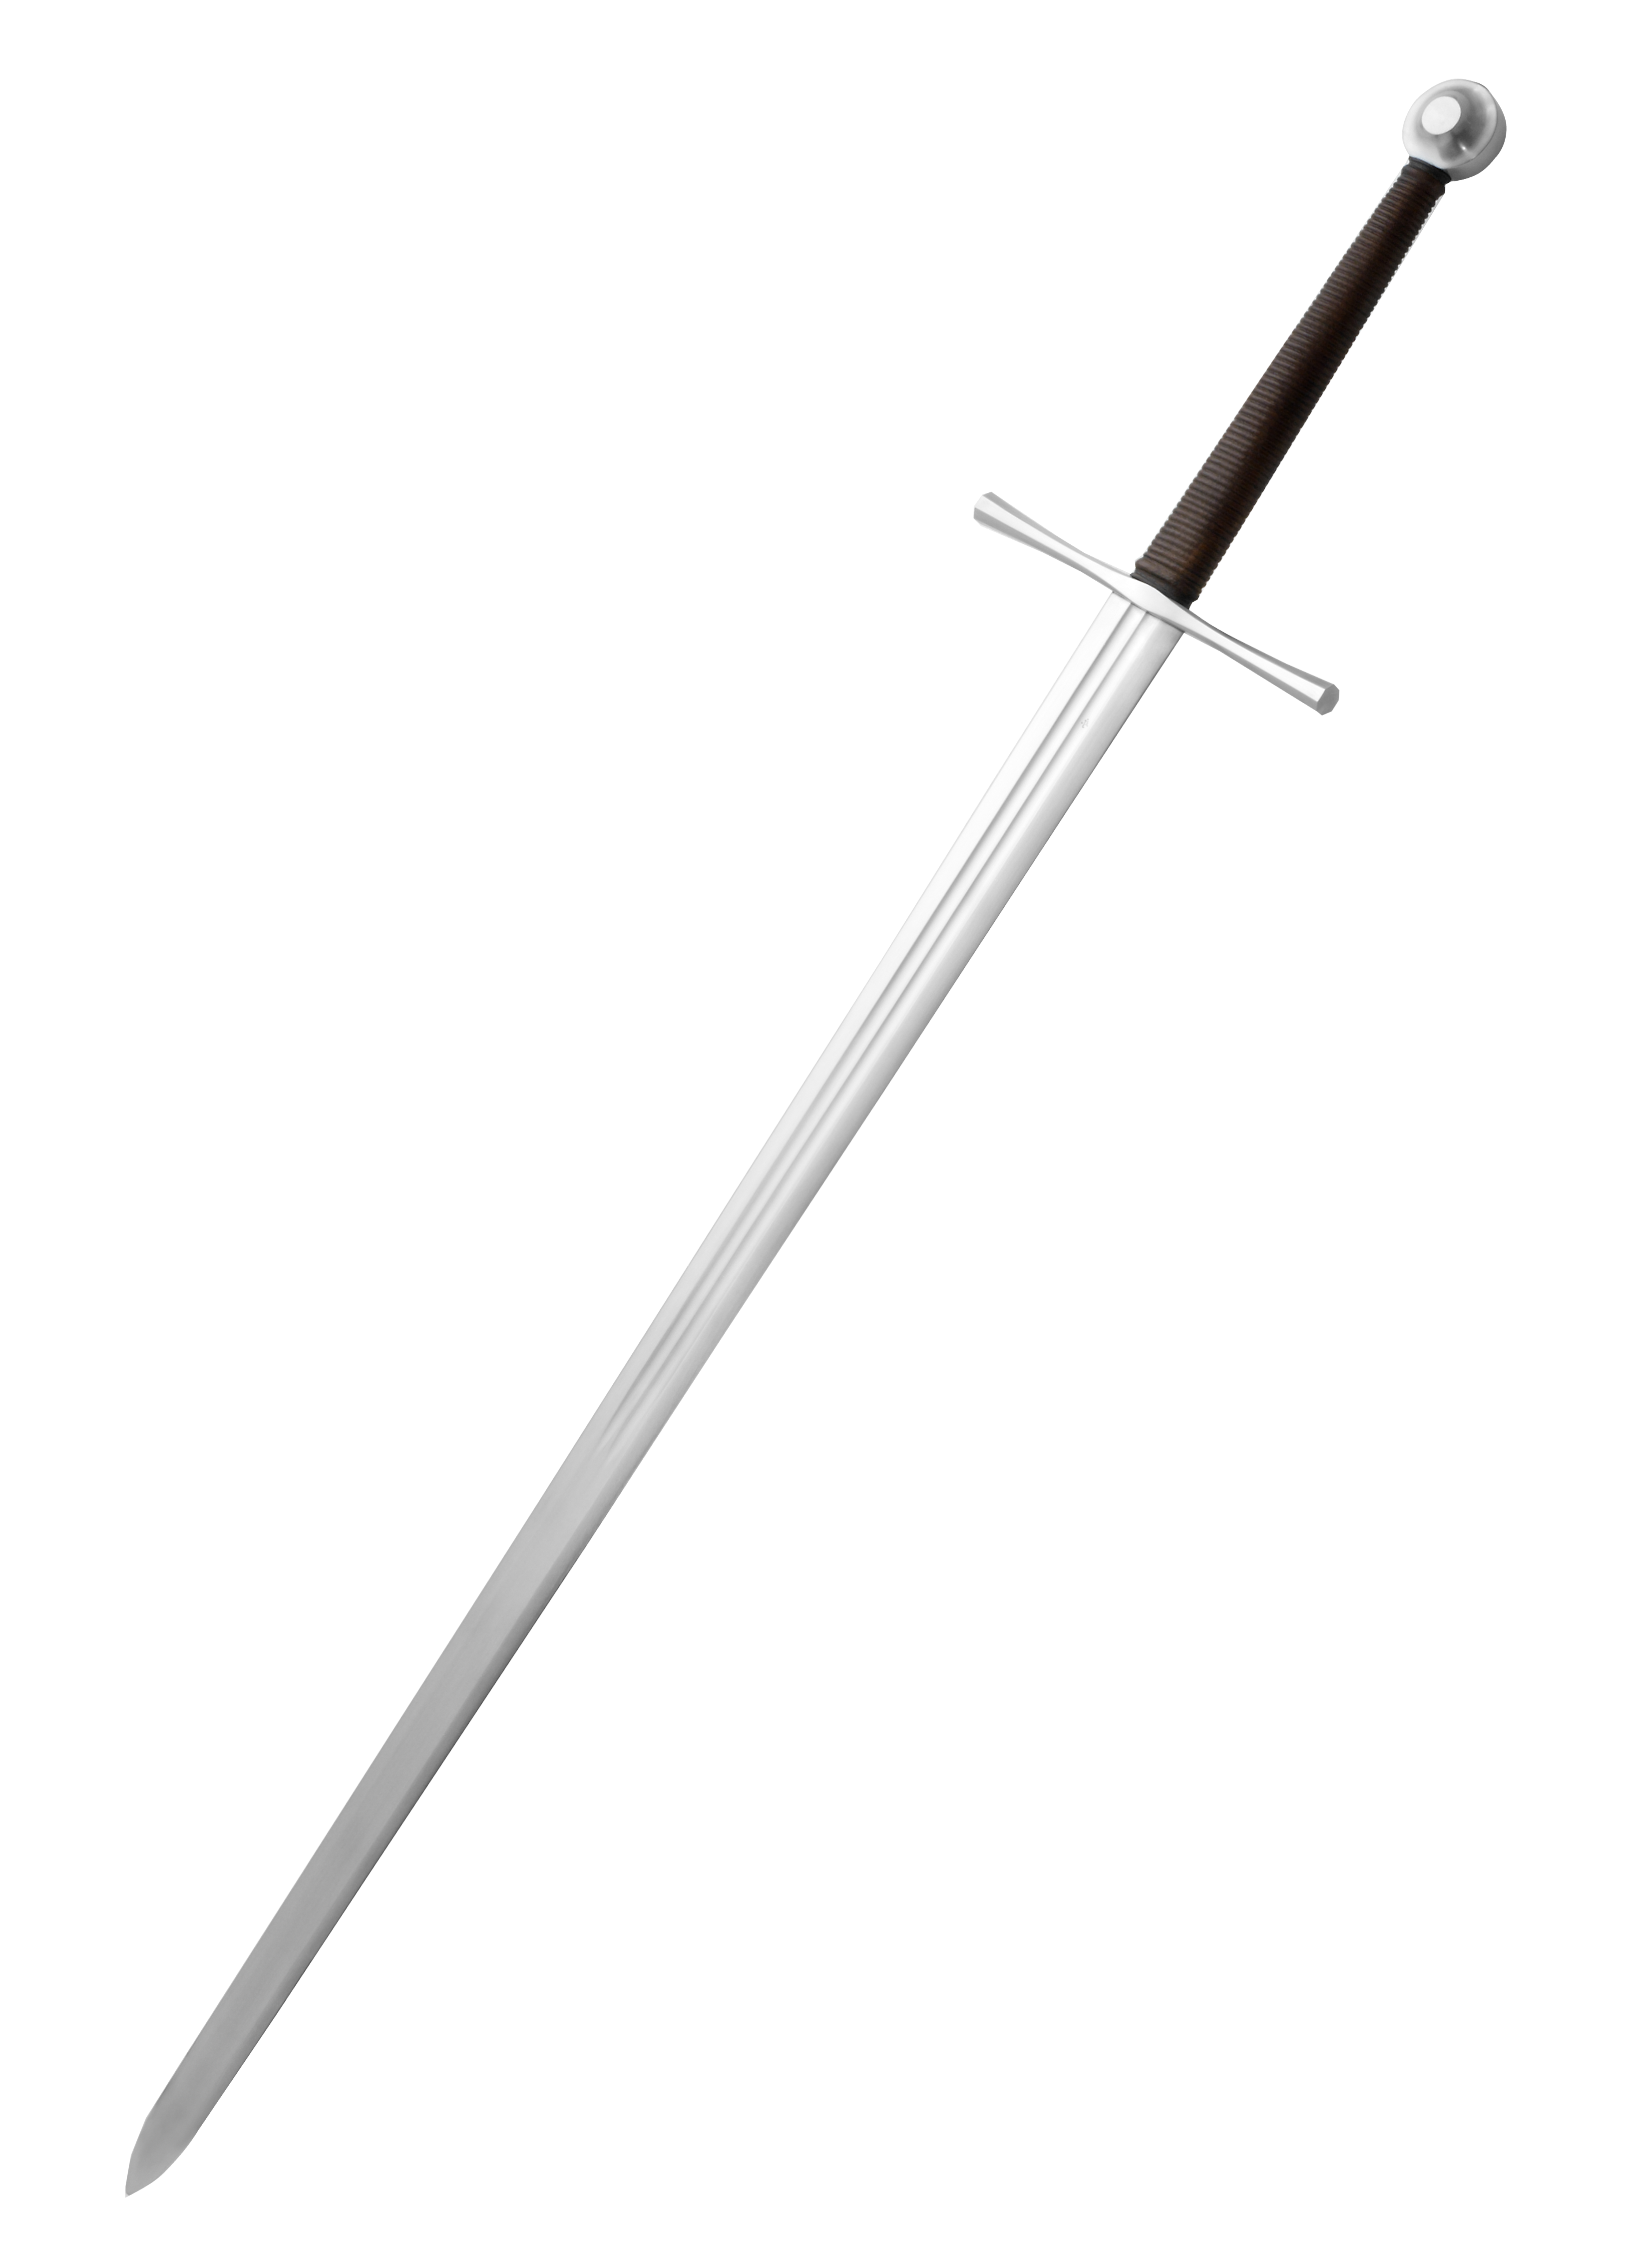 What Is a Hand-and-a-Half Sword?